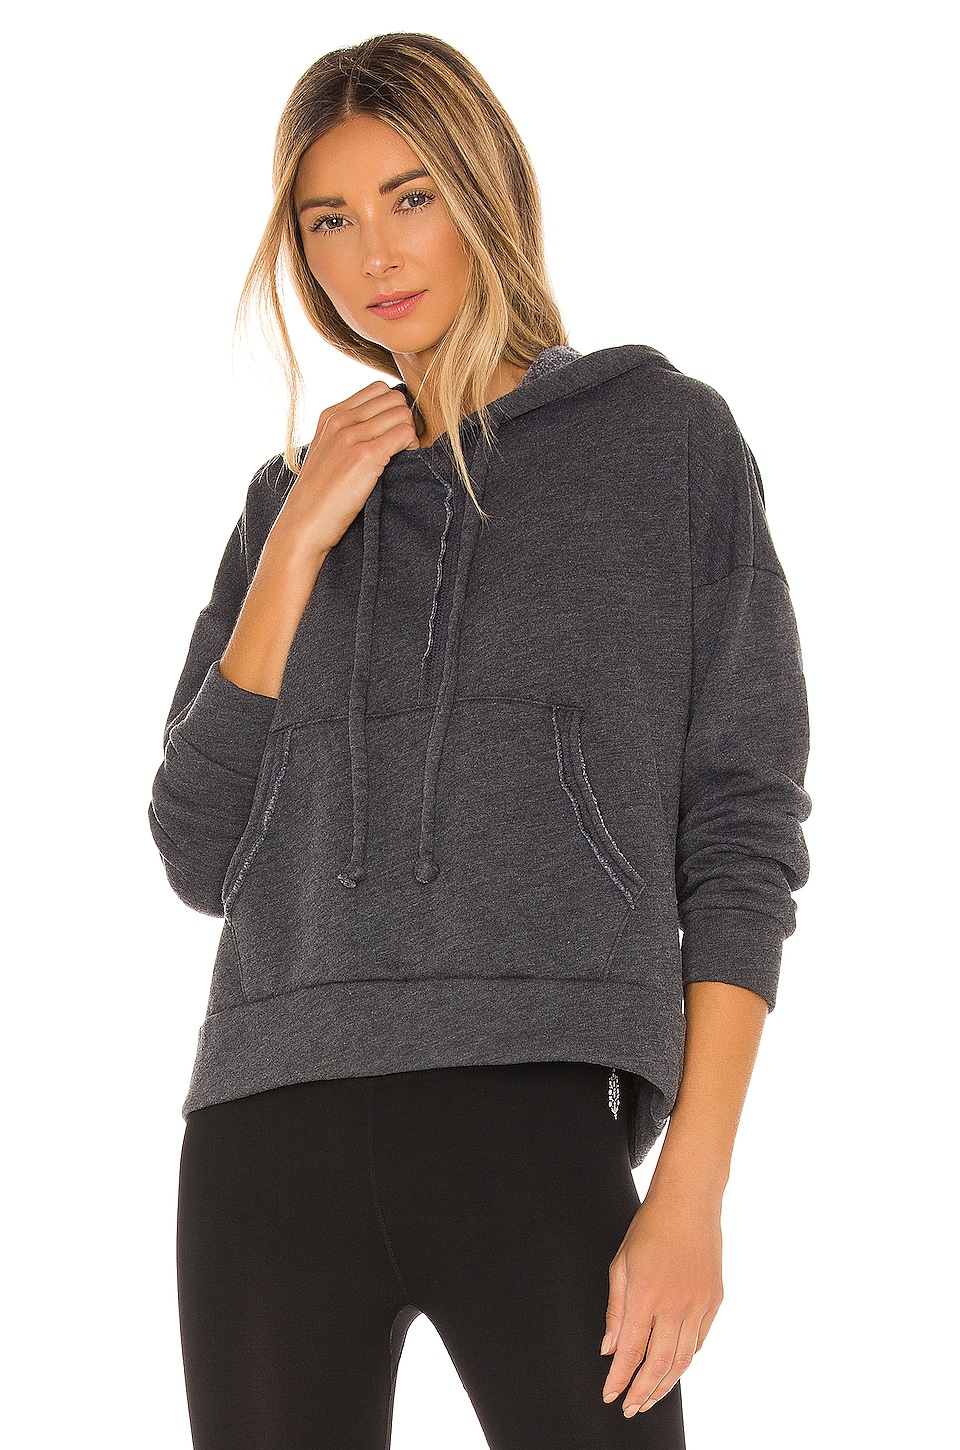 Free People X FP Movement Work It Out Hoodie in Black | REVOLVE